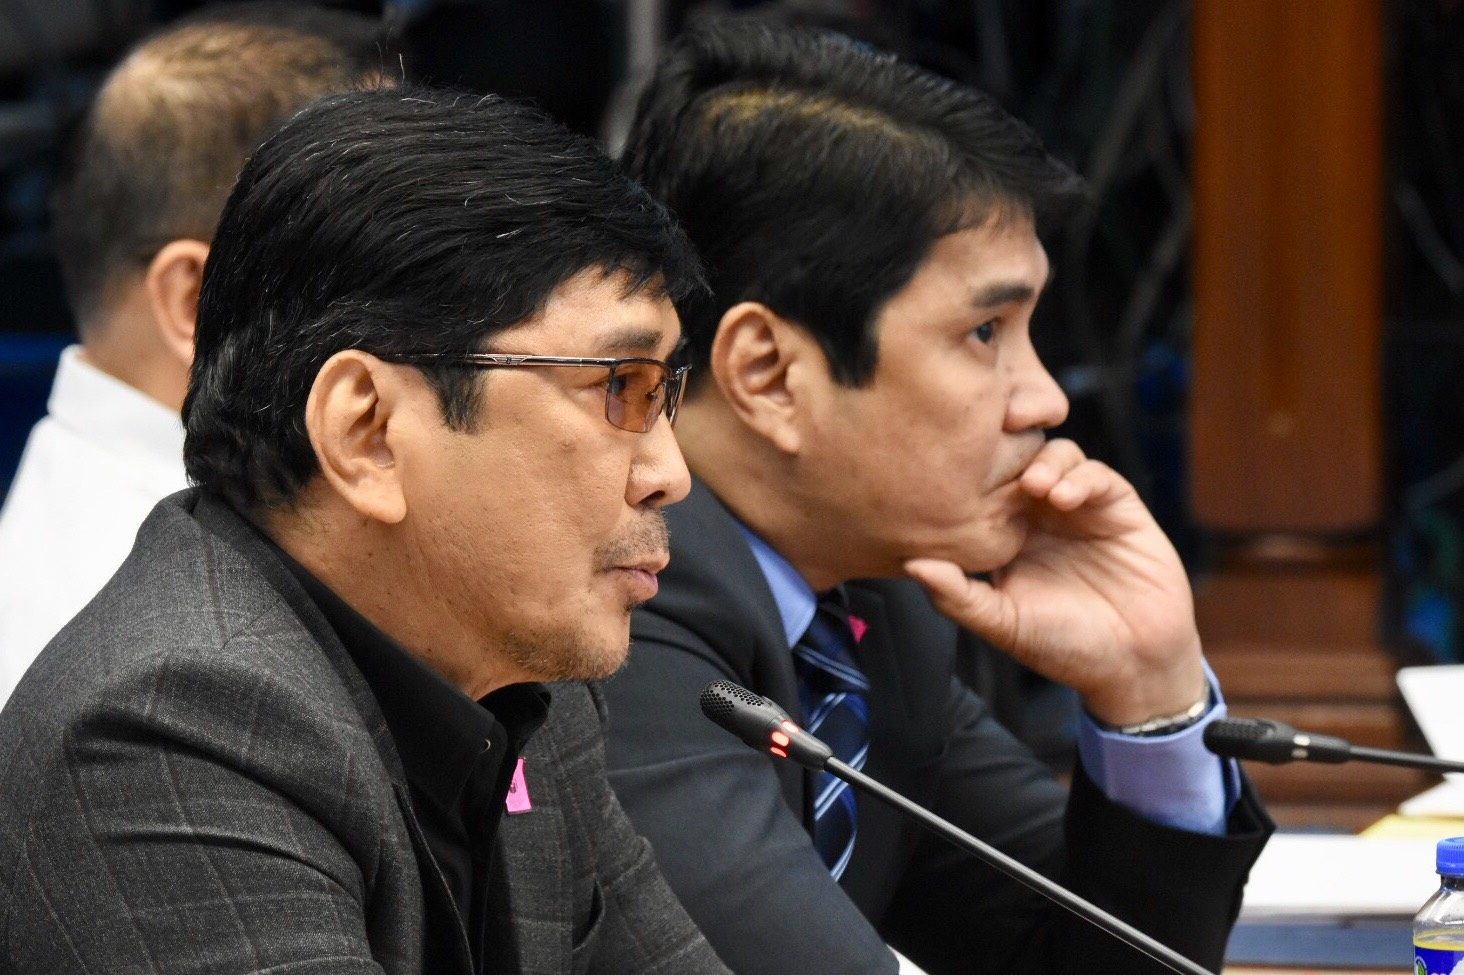 PNP: Tulfo brothers asked for police escorts